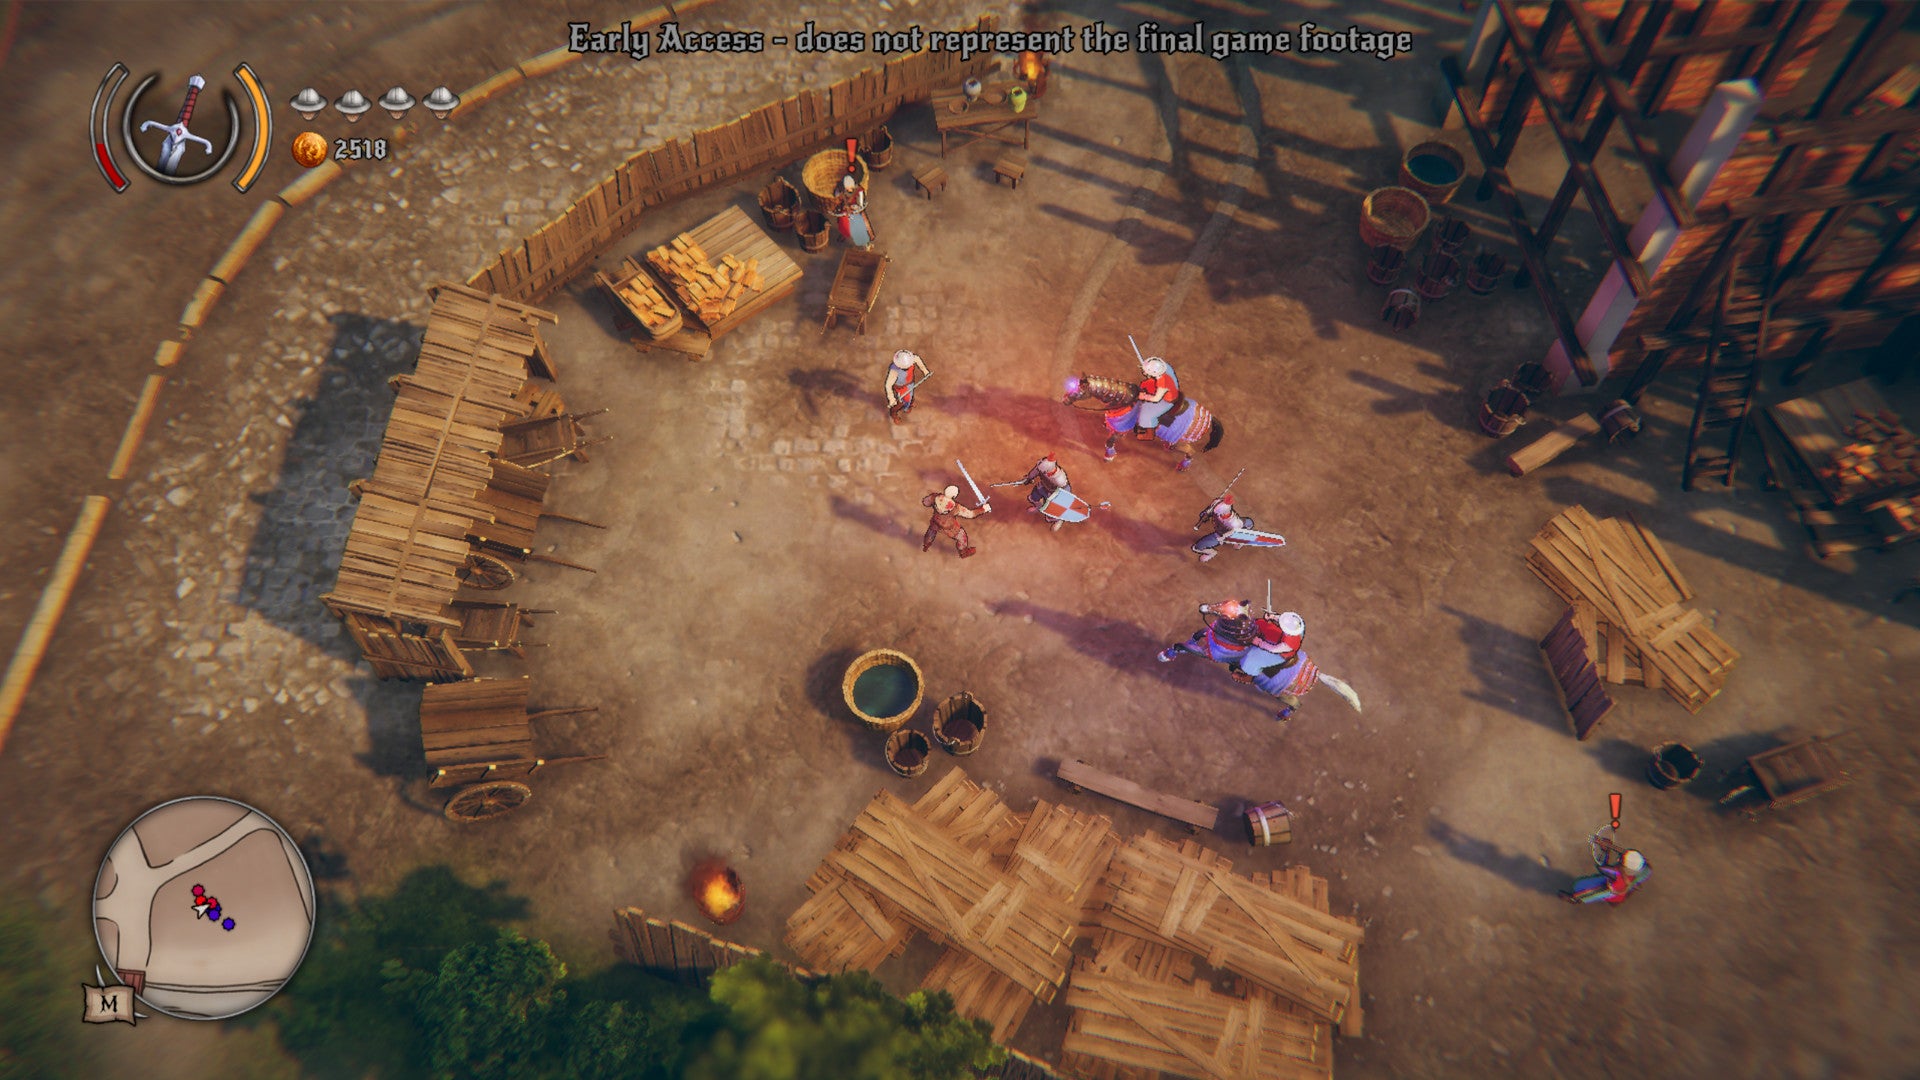 A screenshot of Rustler, showing a topdown 3D view of a man with a sword surrounded by knights with their own swords, two on horseback, in a medieval world.